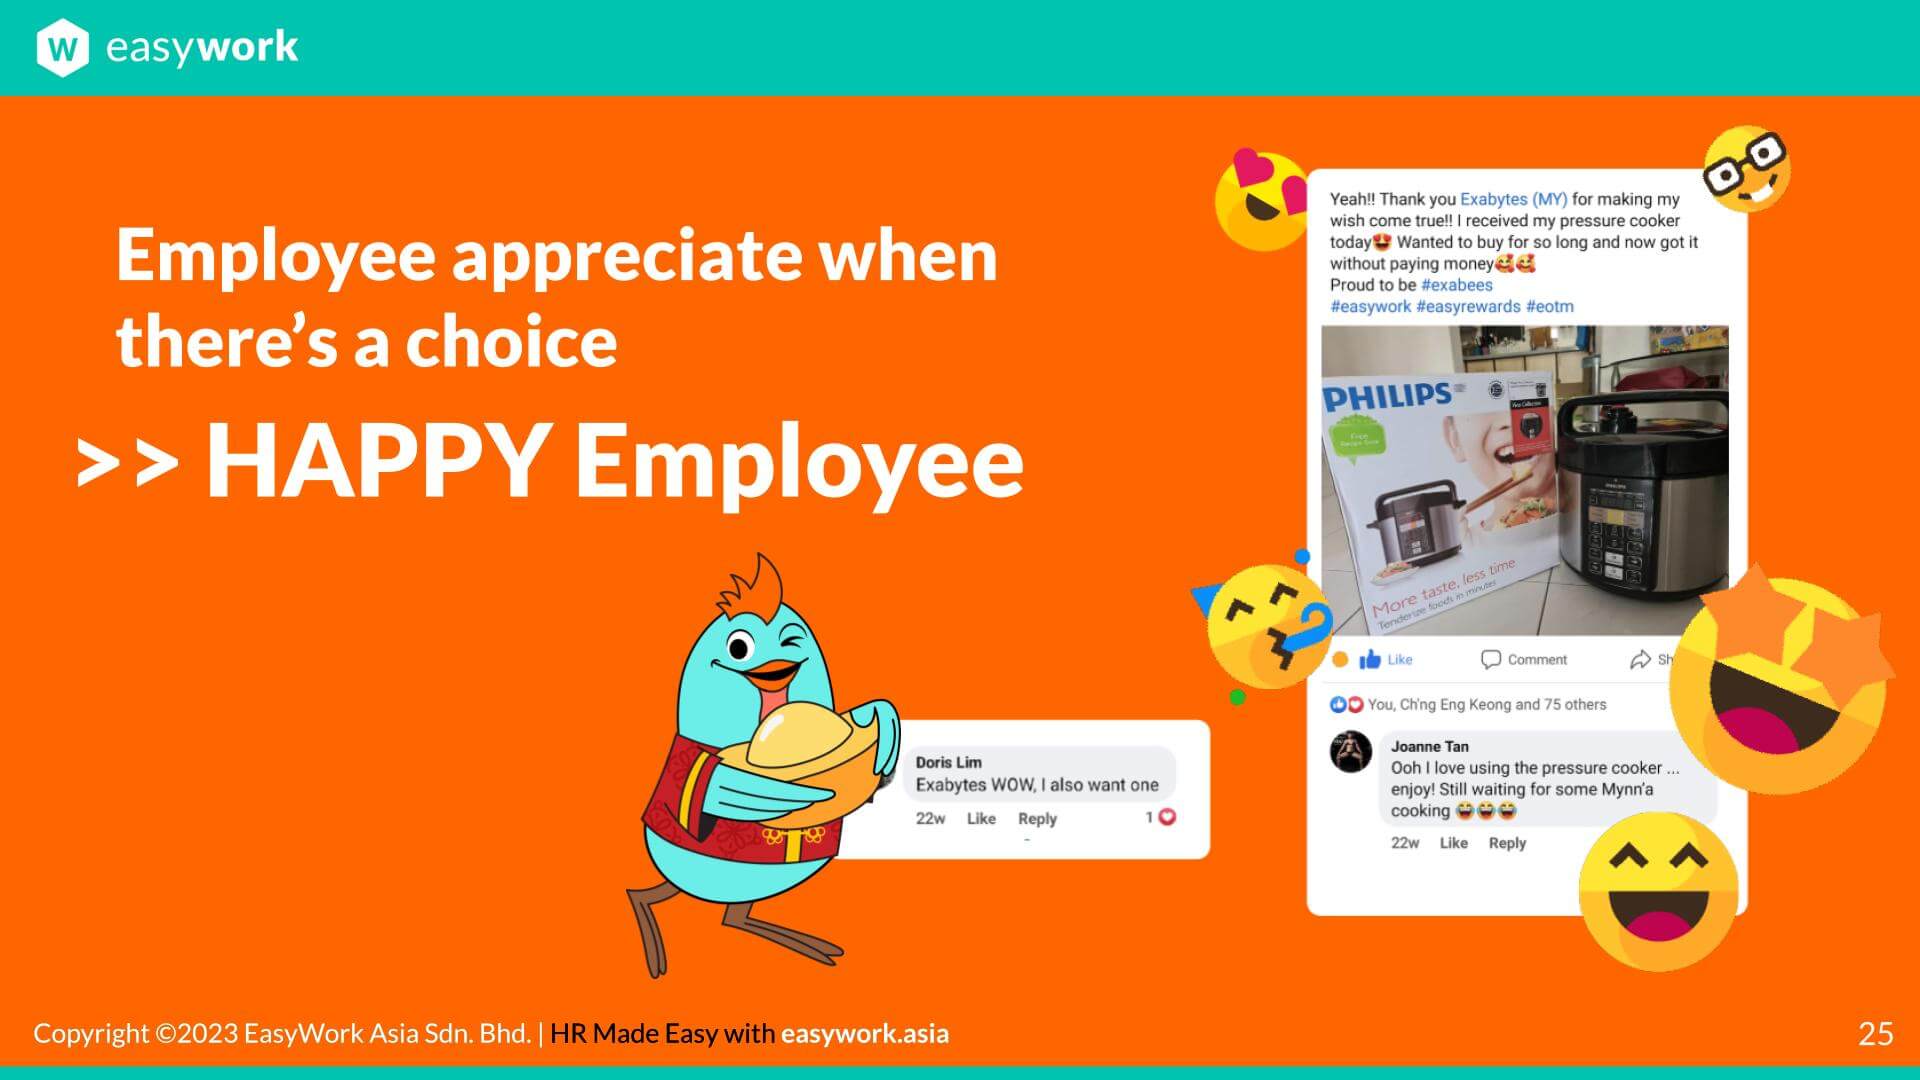 Discover the power of recognition and incentives with EasyReward by EasyWork boosts employee motivation and job satisfaction.